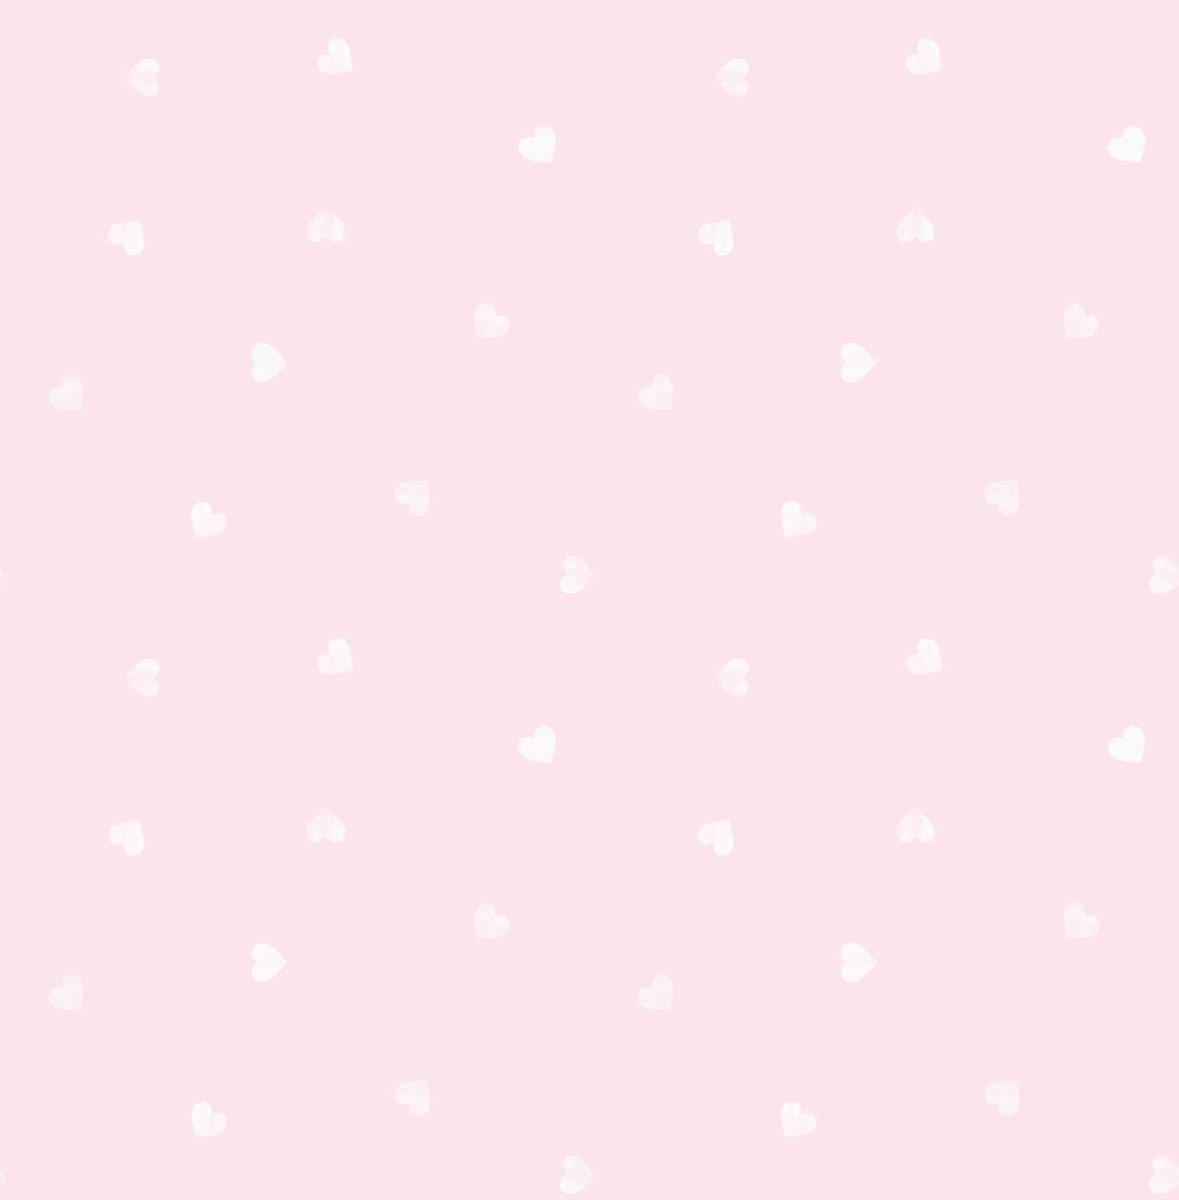 A pink background with white hearts - Pink heart